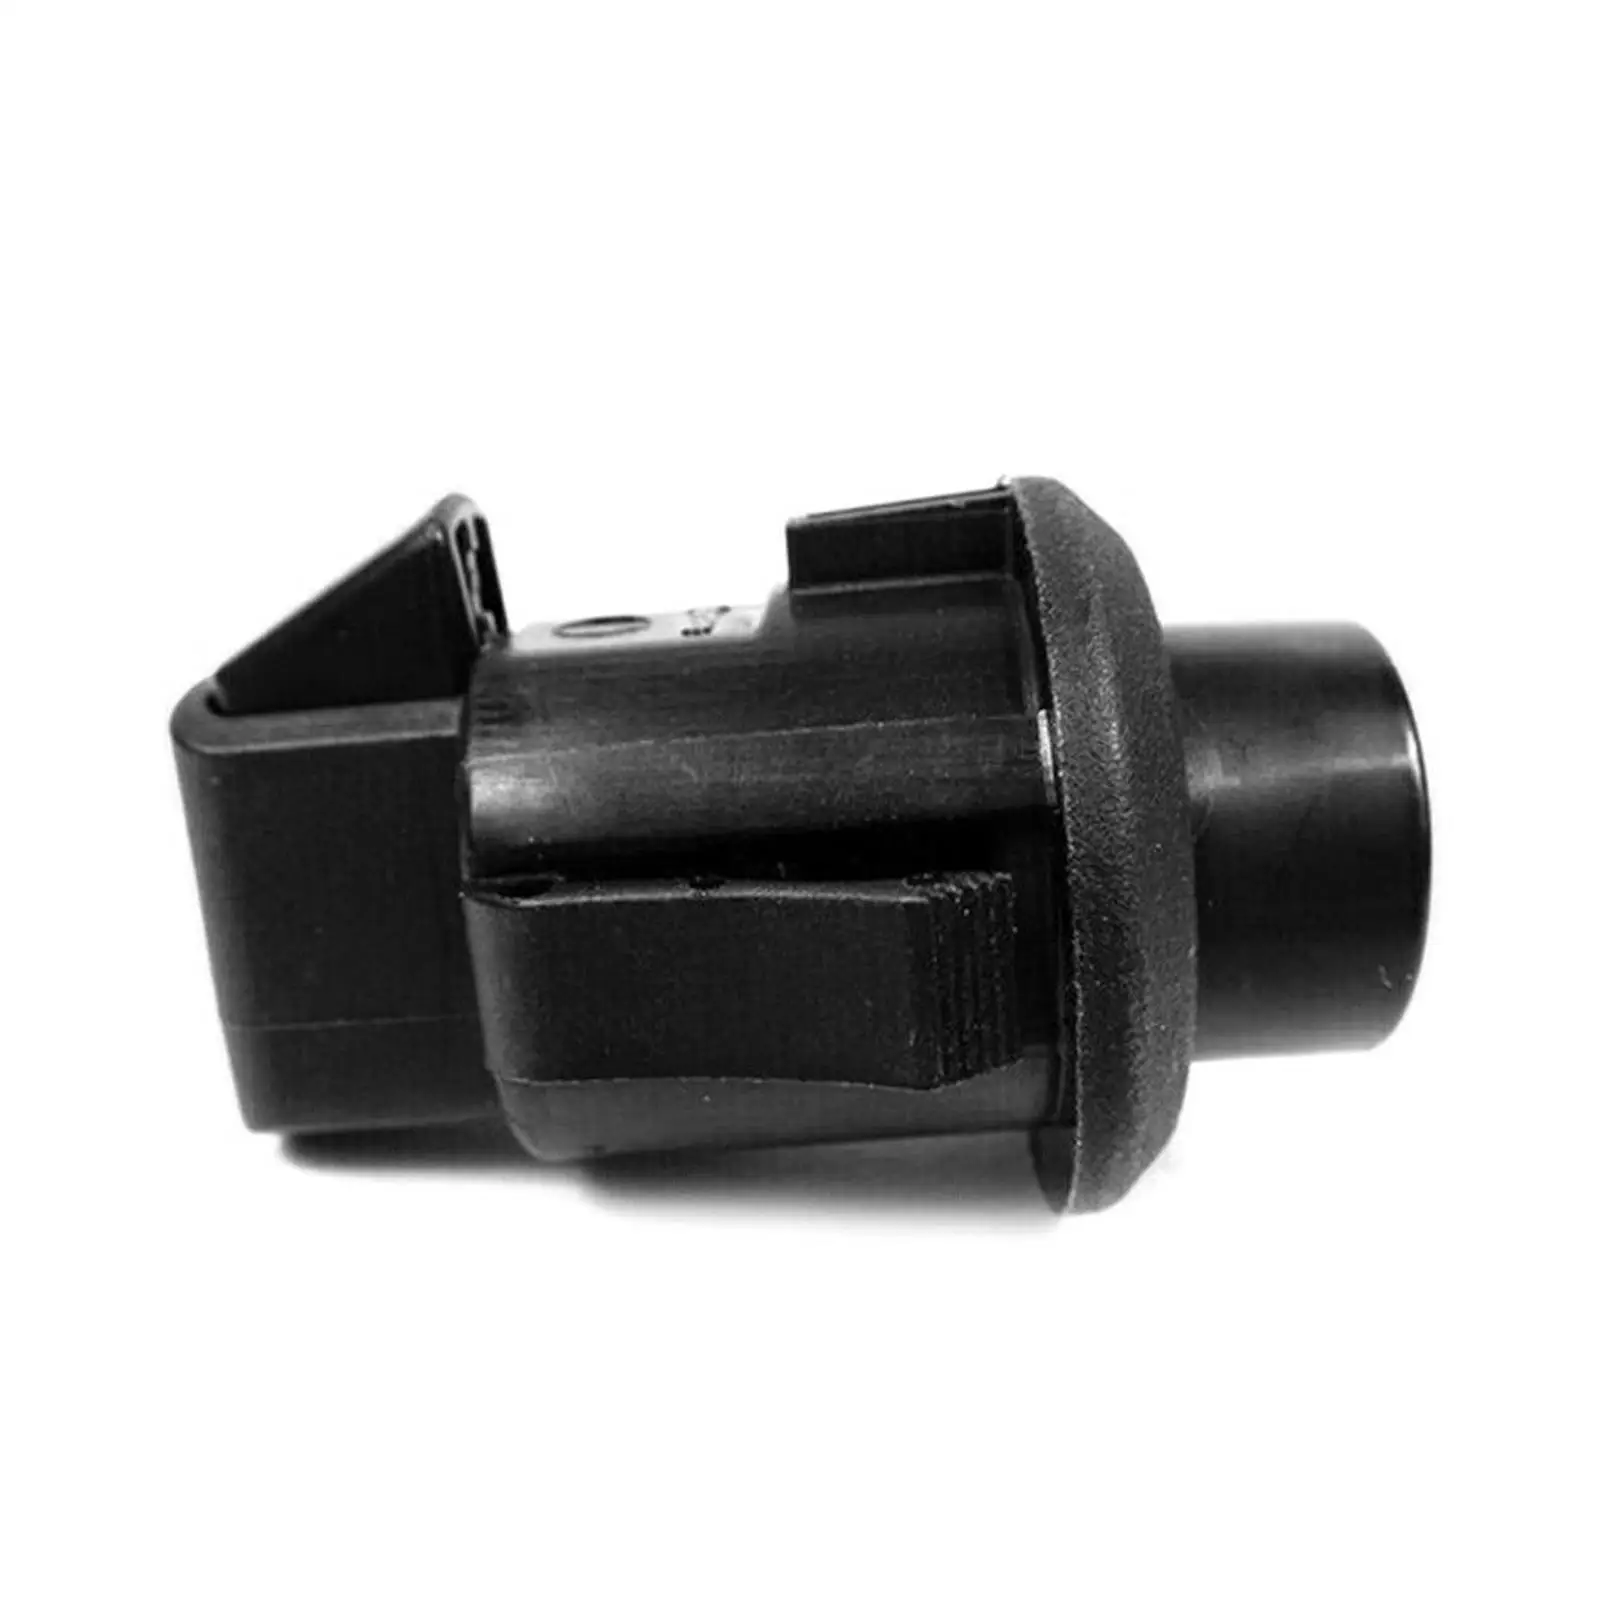 Arm Rest Lid Lock Latch High Performance Replace Part for